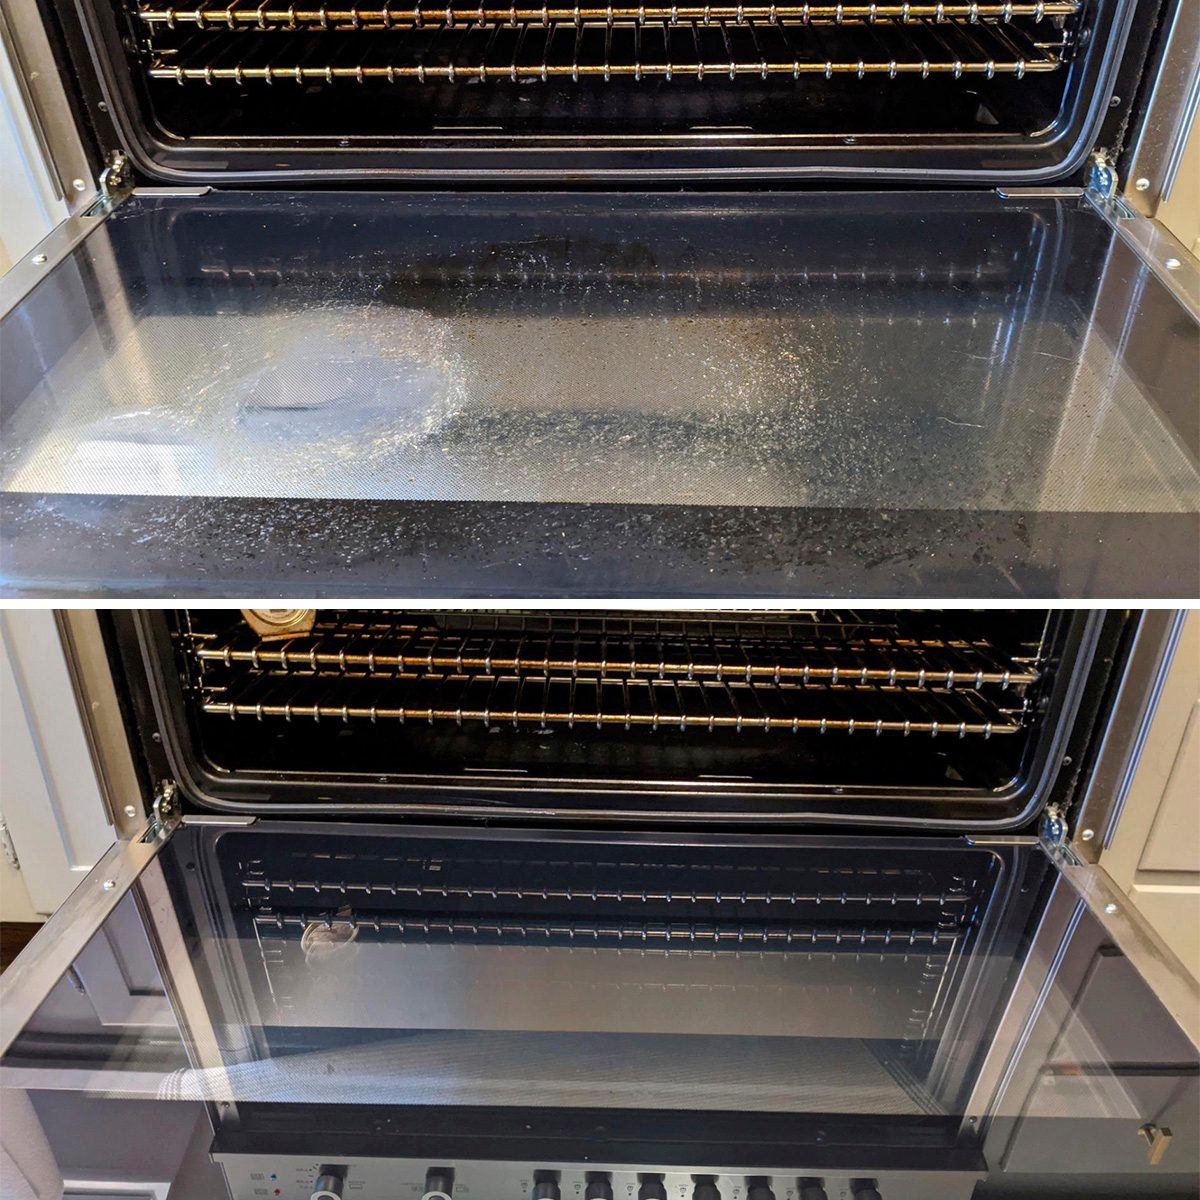 I Tried The Viral Cif Cream Cleanser On My Dirty Oven and It Worked Like  Magic